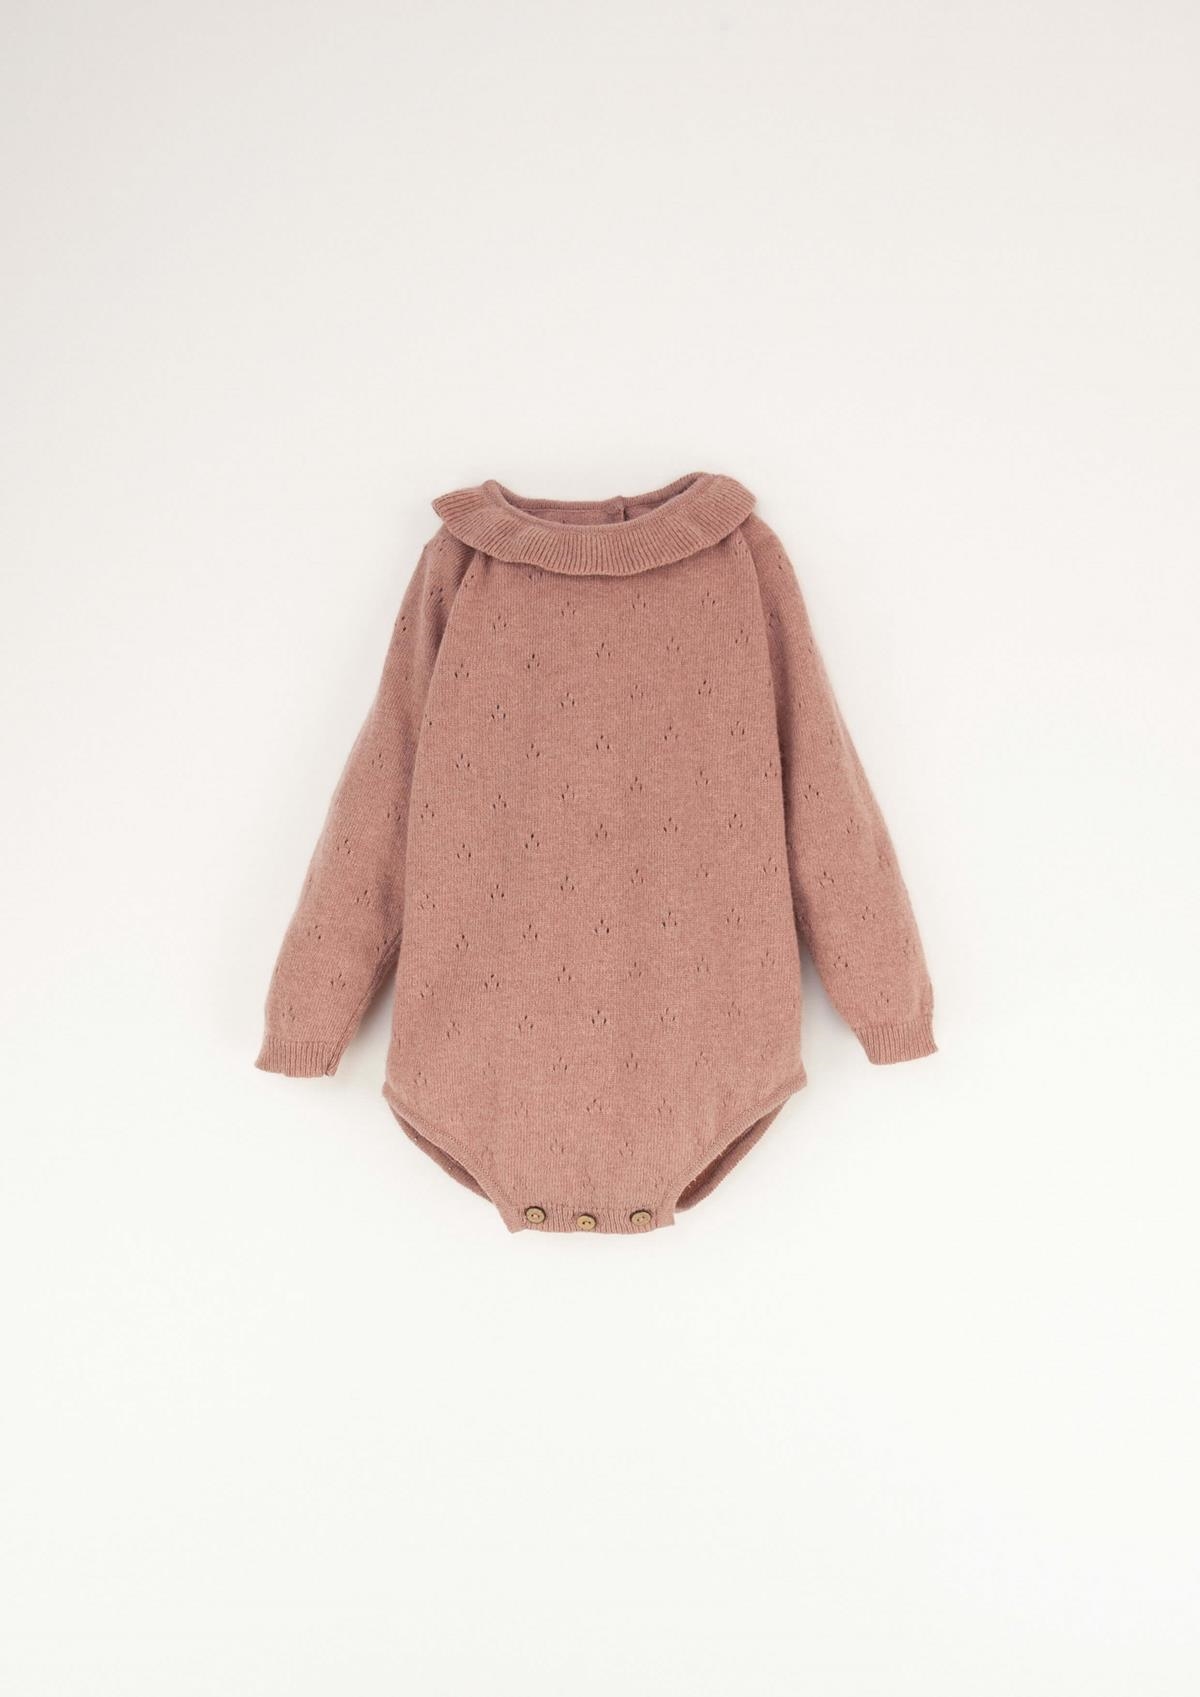 Mod.5.3 Dusty pink knitted romper suit with frilled collar | AW23.24 Mod.5.3 Dusty pink knitted romper suit with frilled collar